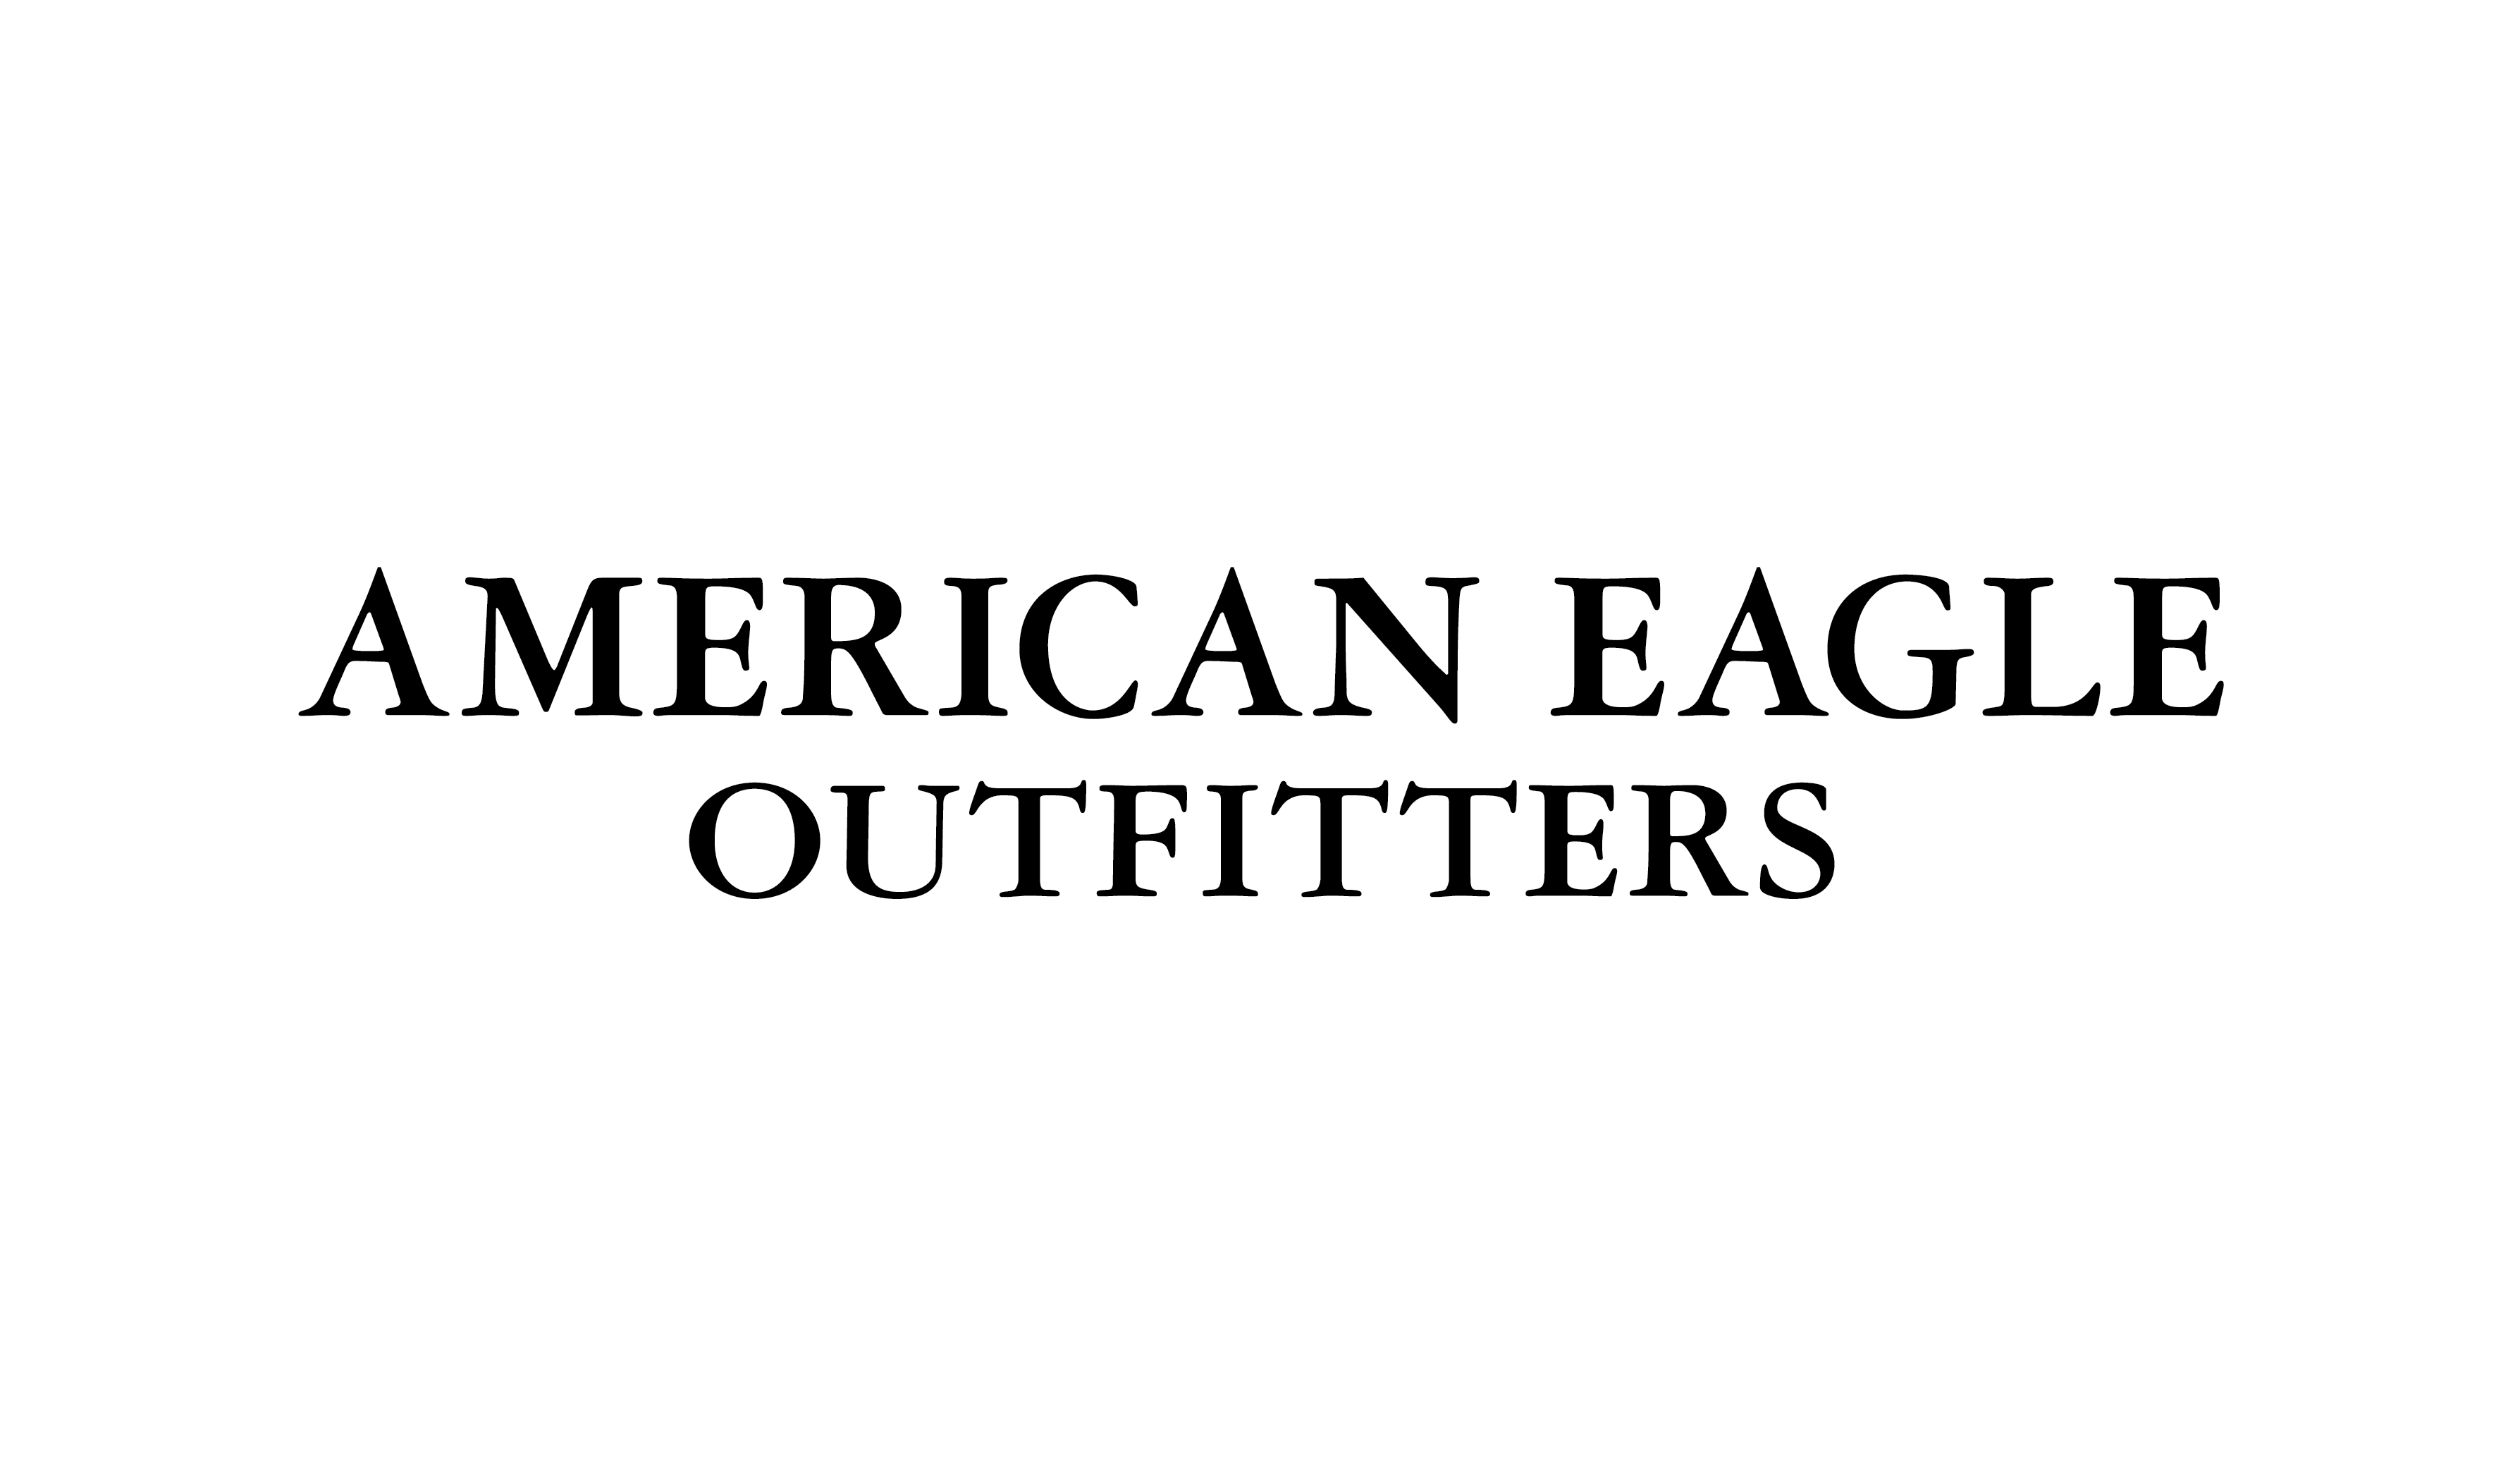 American Eagle Outfitters Logo - American Eagle Outfitters | The Avenue Murfreesboro